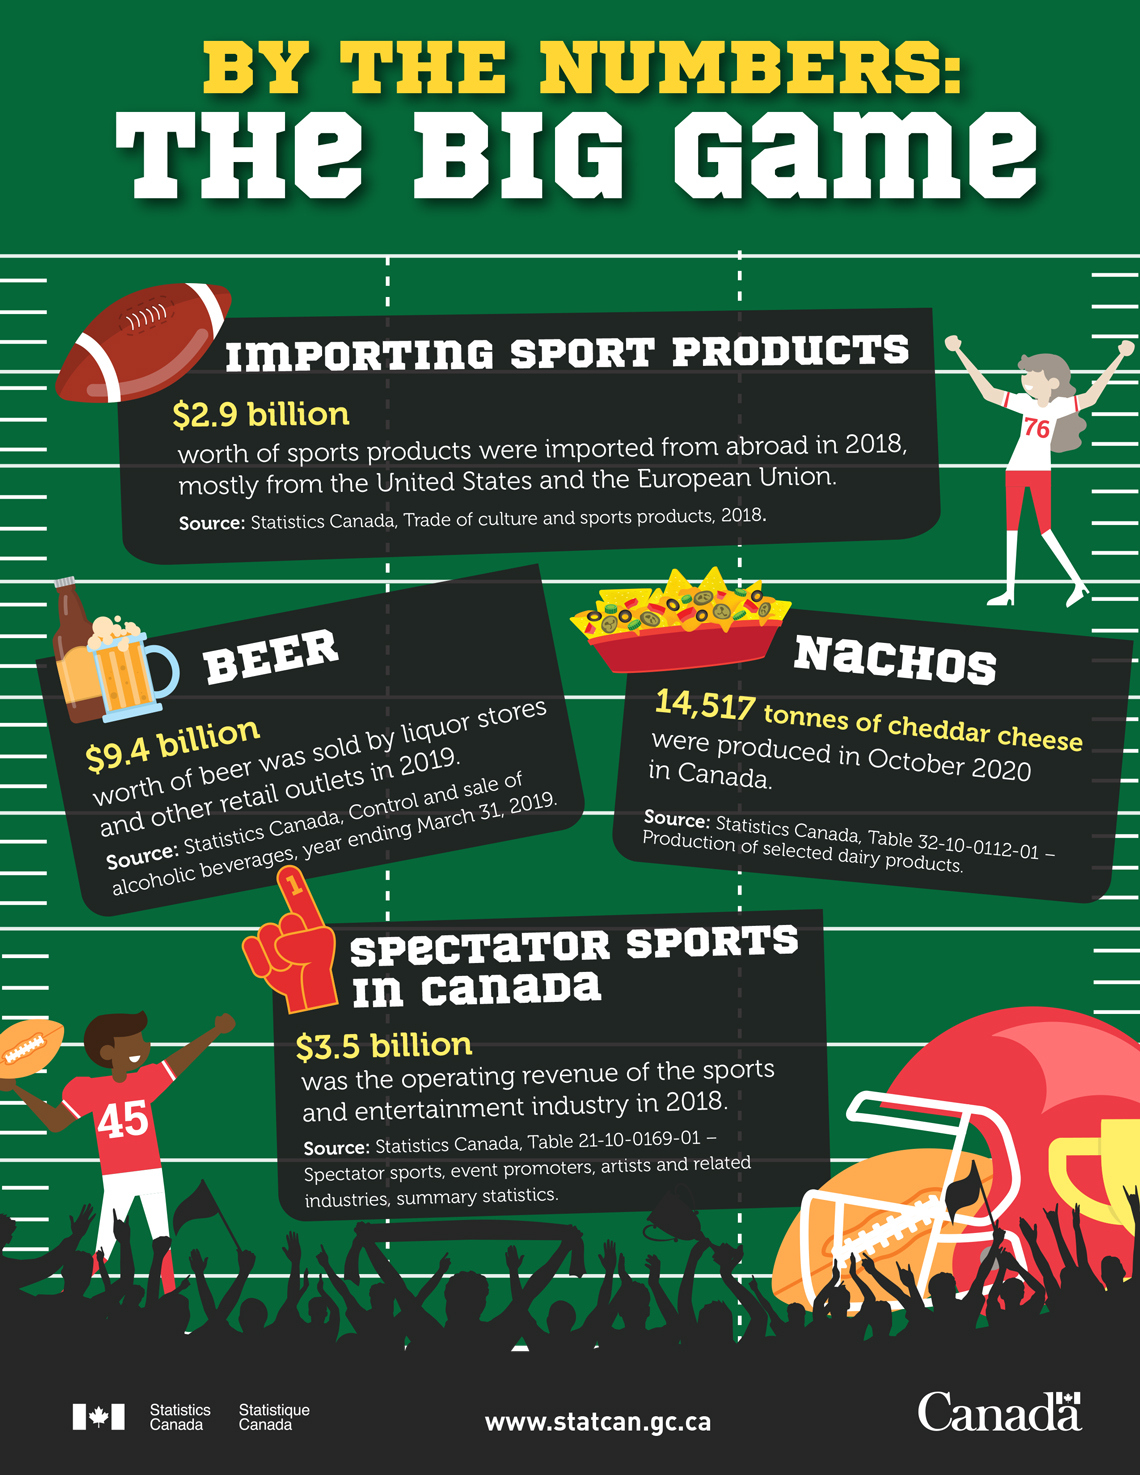 By the numbers: The Big Game